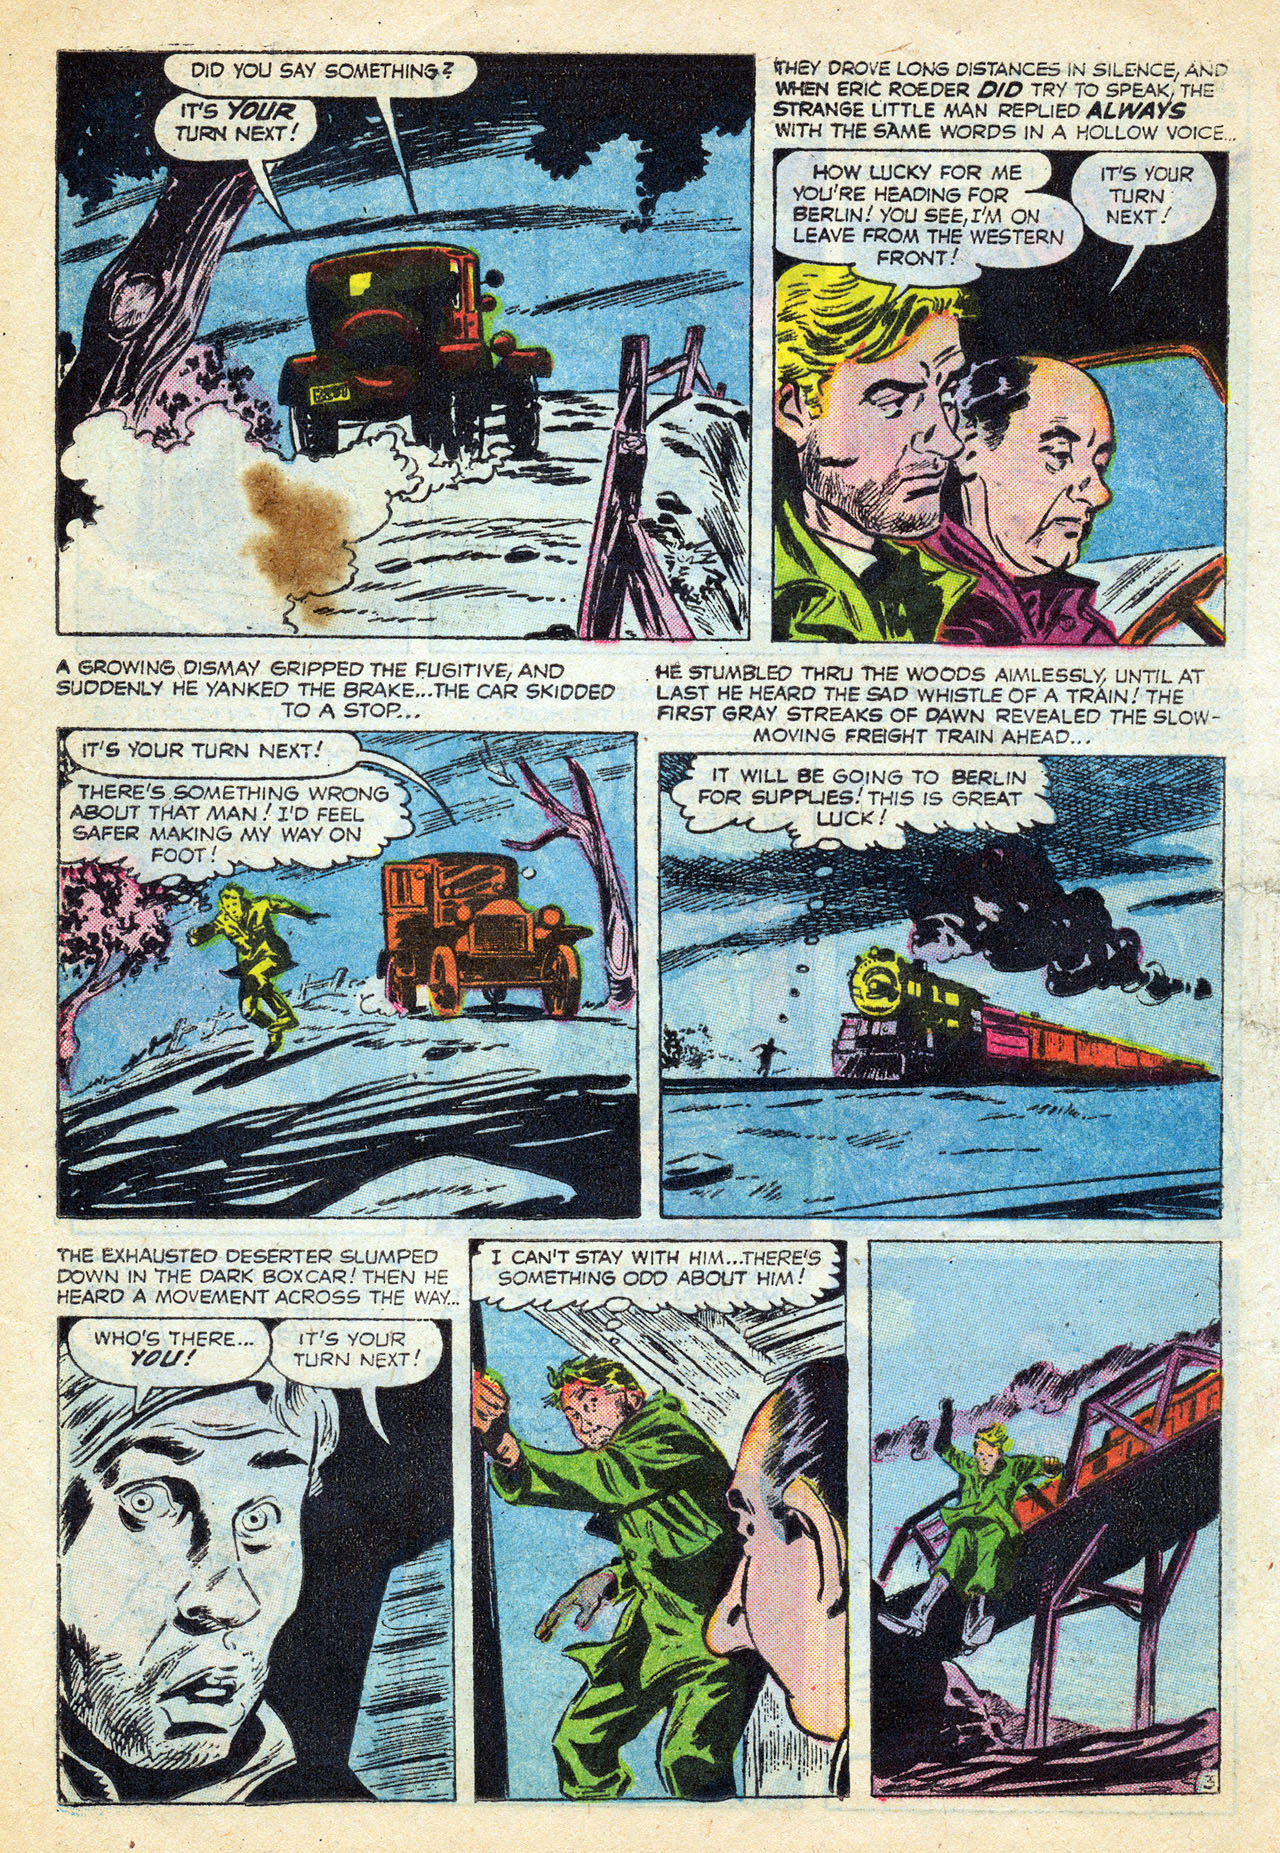 Marvel Tales (1949) 140 Page 11